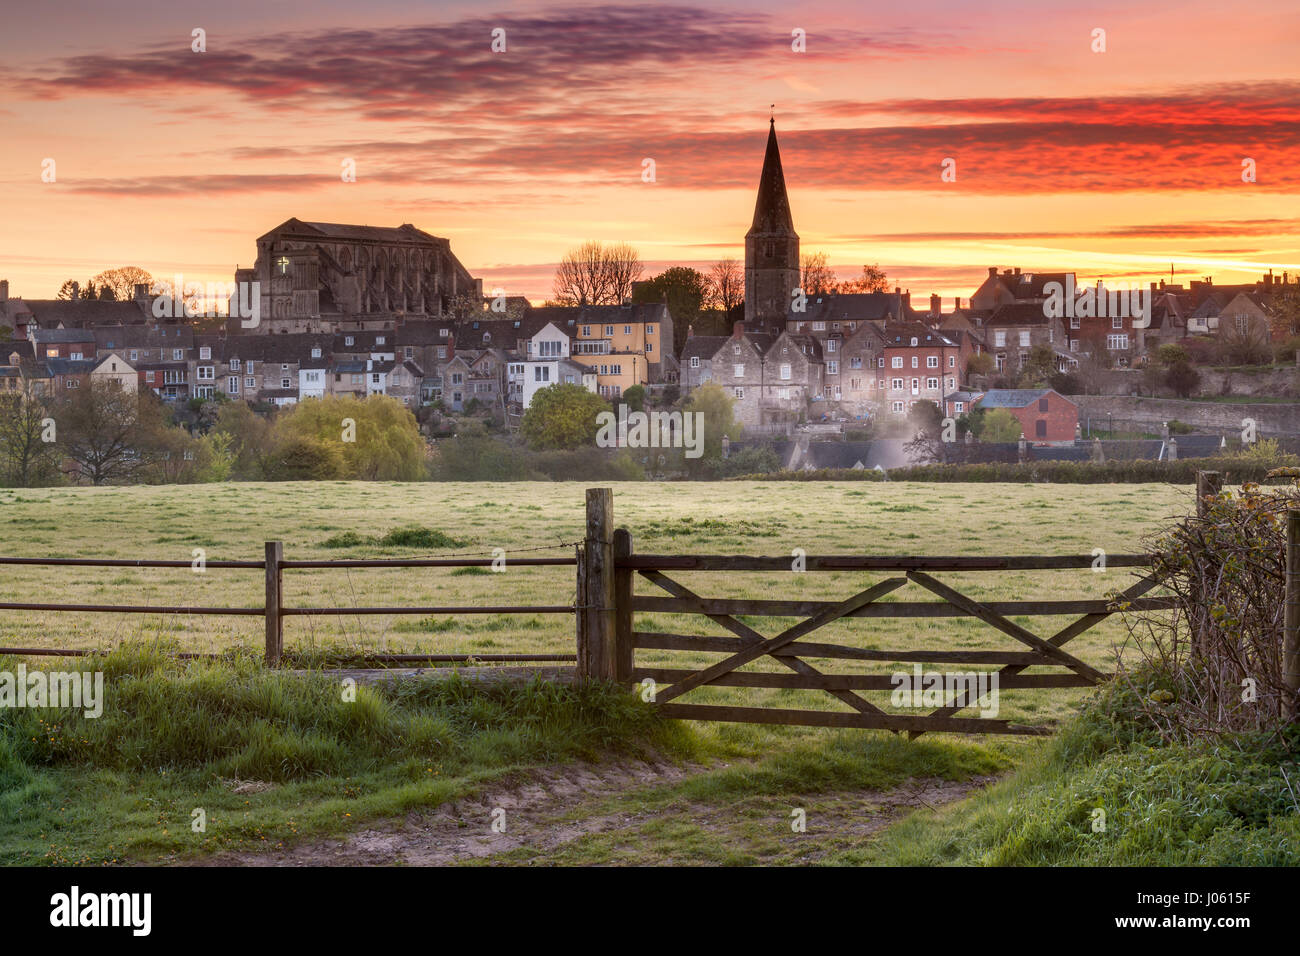 UK Weather - The overnight groundfrost melts away as the sun rises over the Wiltshire hillside town of Malmesbury, Wiltshire, in April Stock Photo